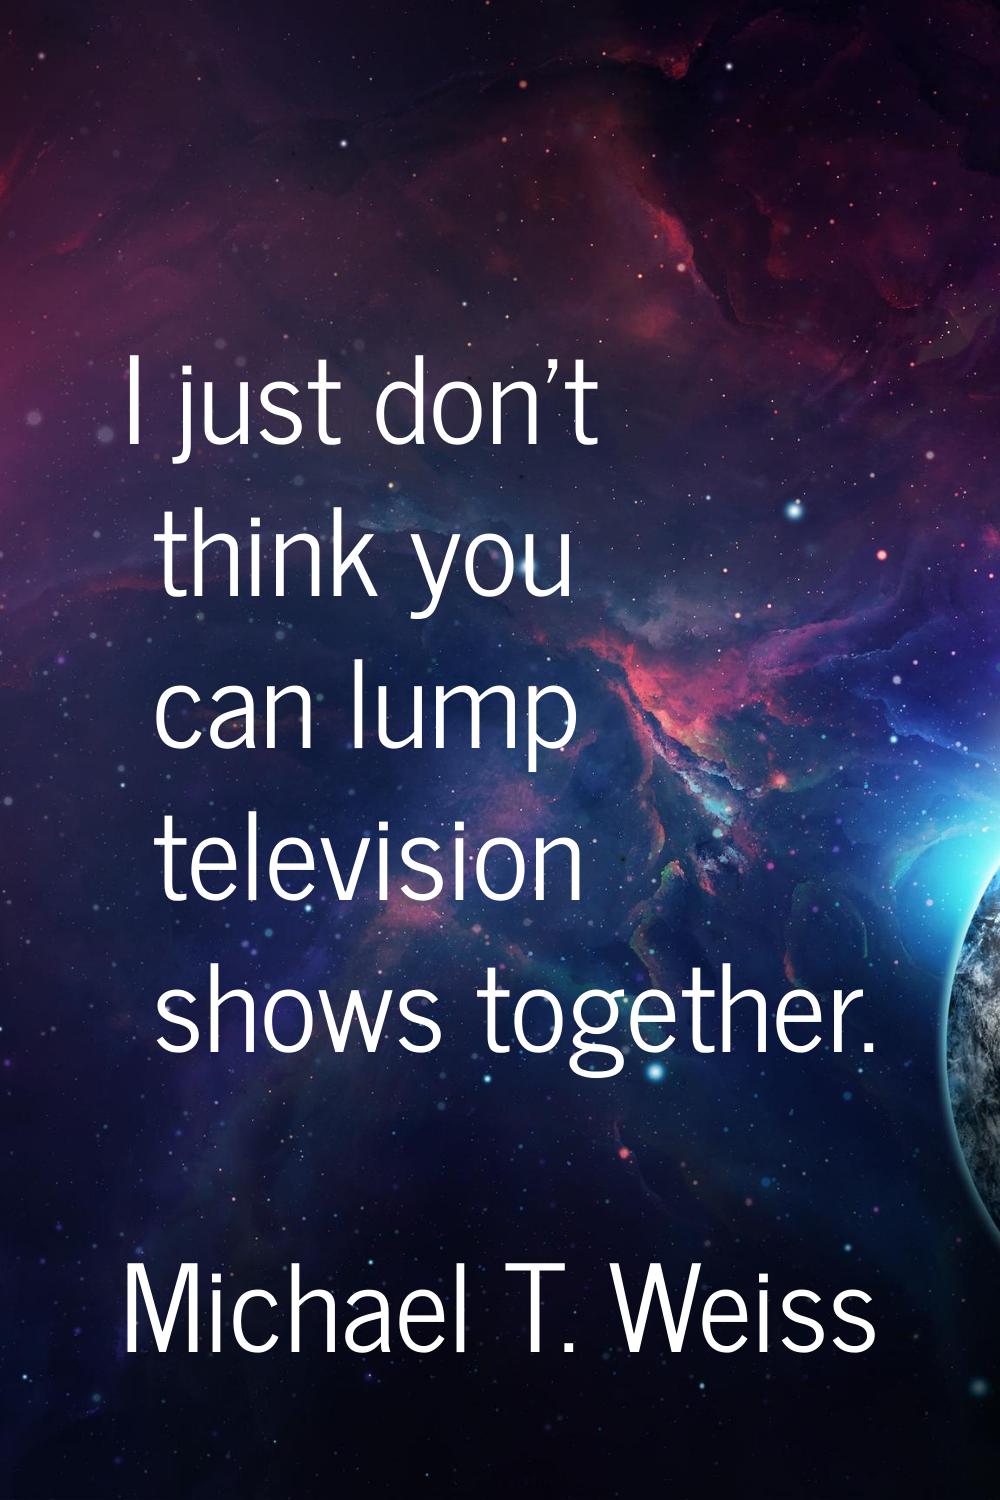 I just don't think you can lump television shows together.